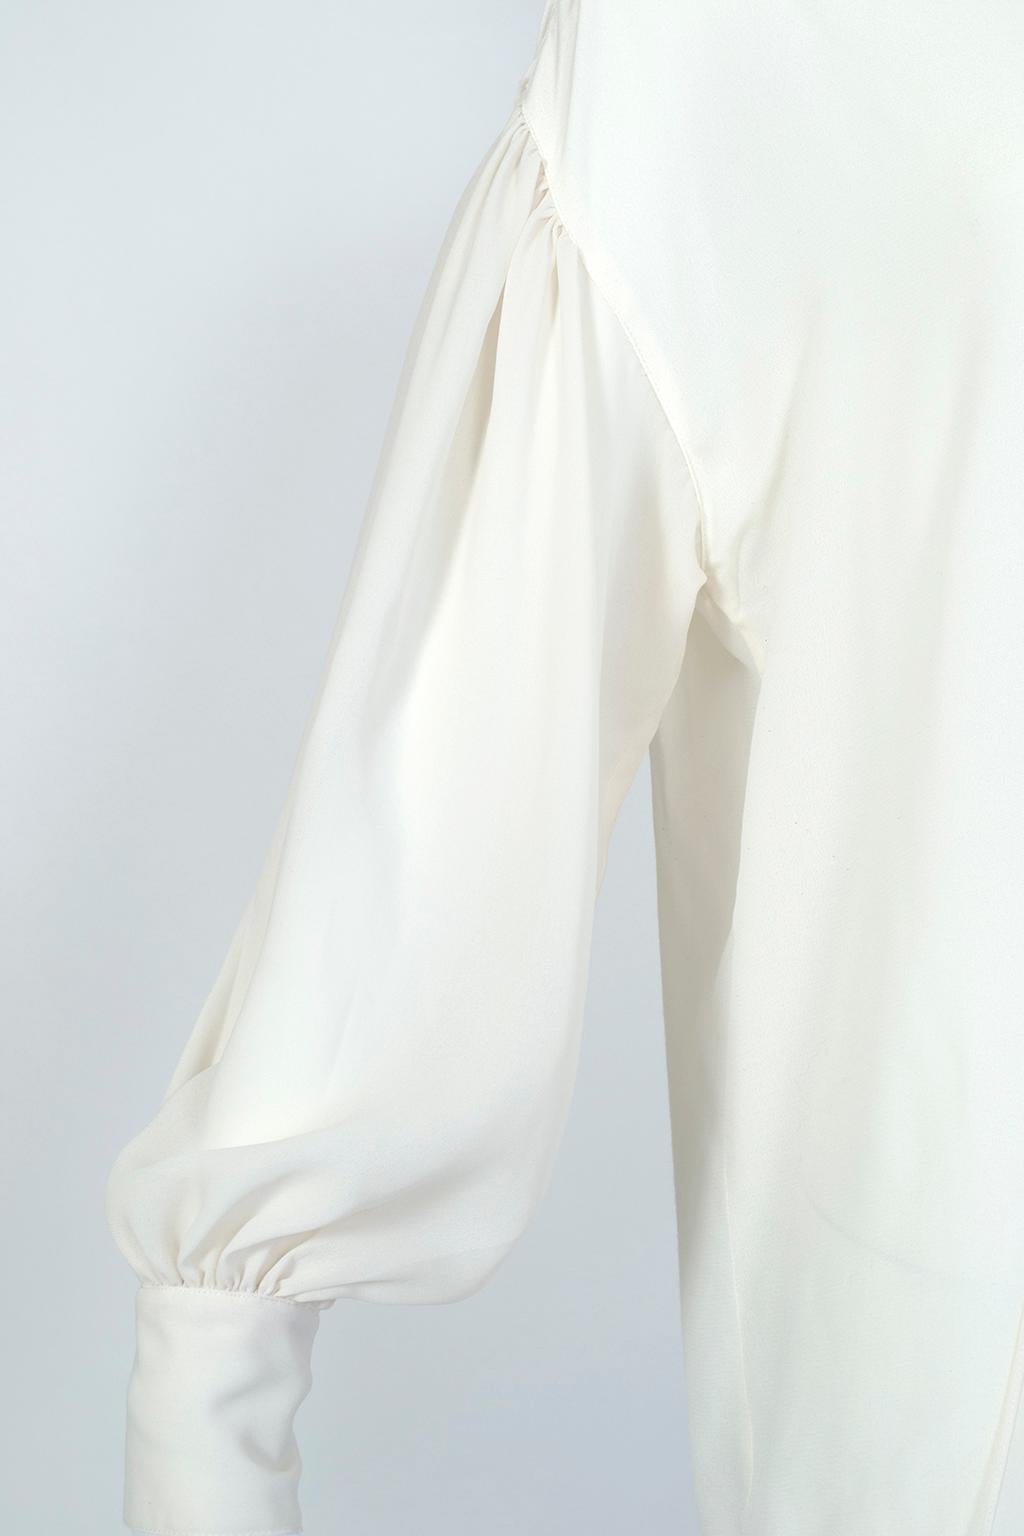 DVF von Furstenberg Boho Ivory Drop Shoulder Pussy Bow Poet's Blouse - L, 1970s In Good Condition For Sale In Tucson, AZ